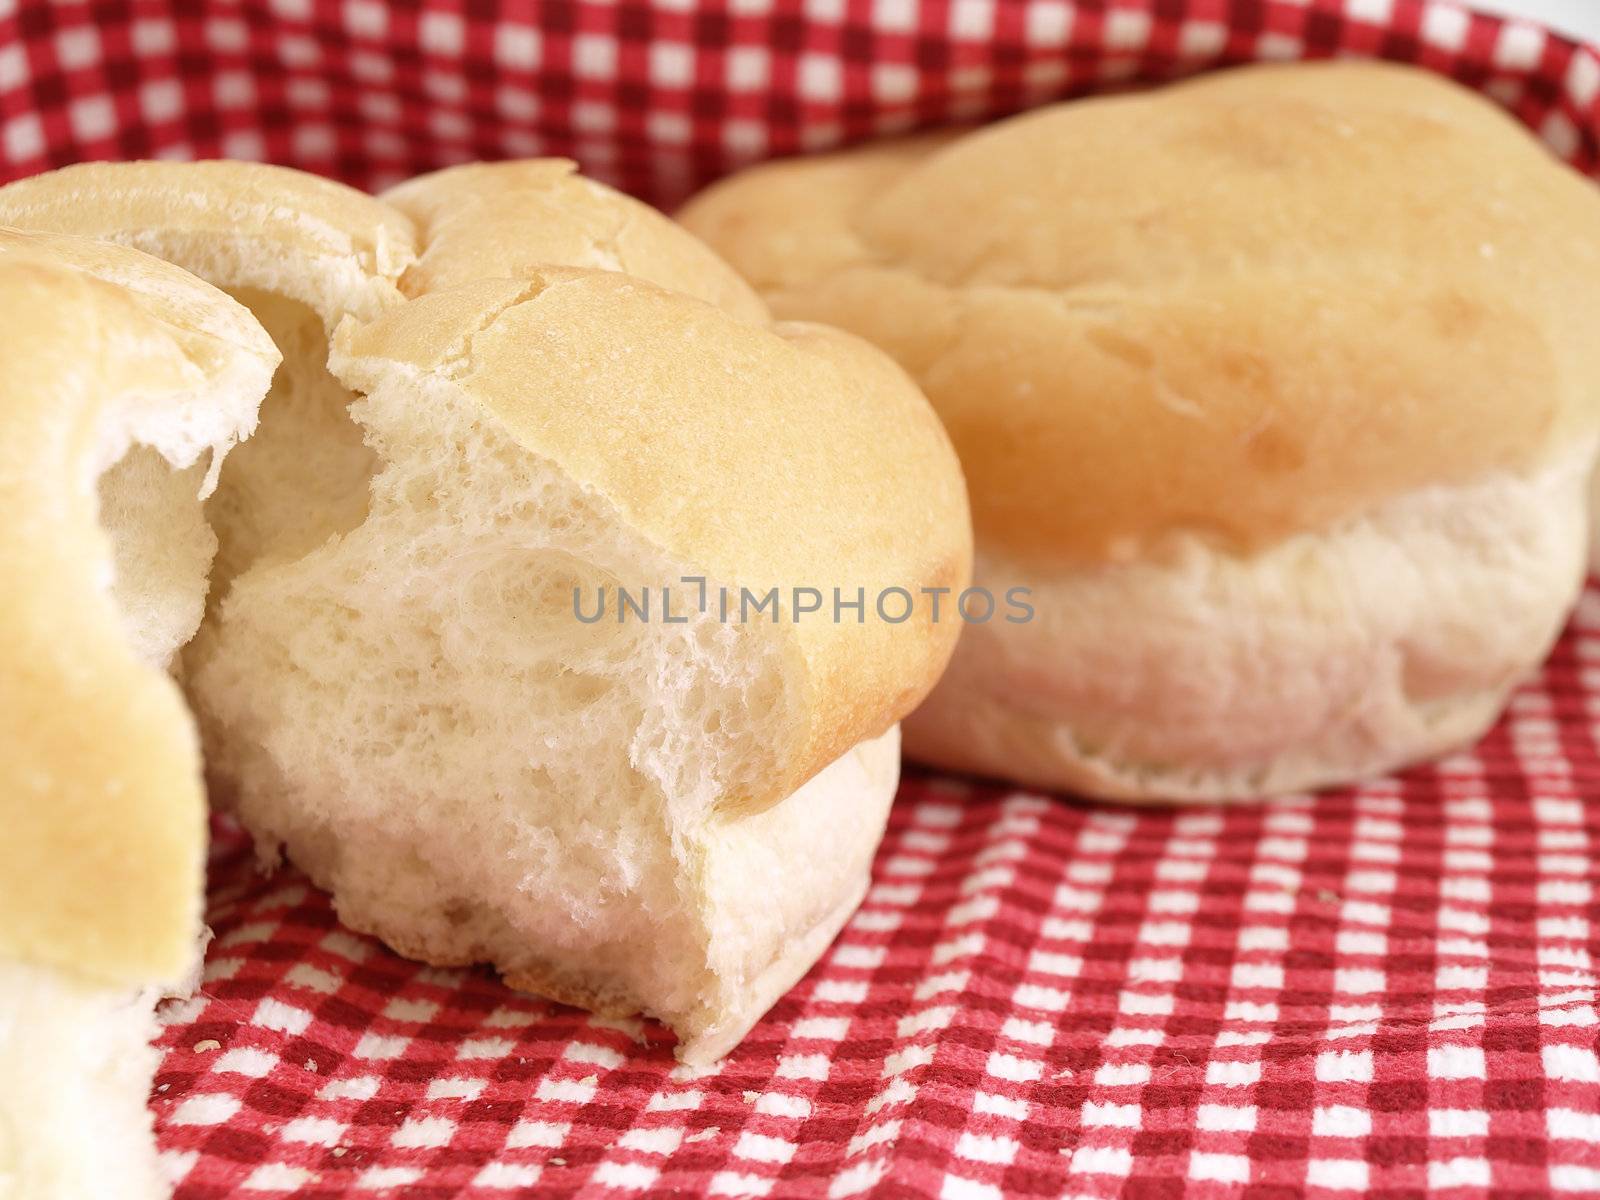 Fresh rolls of bread in a basket. Studio isolated over white.